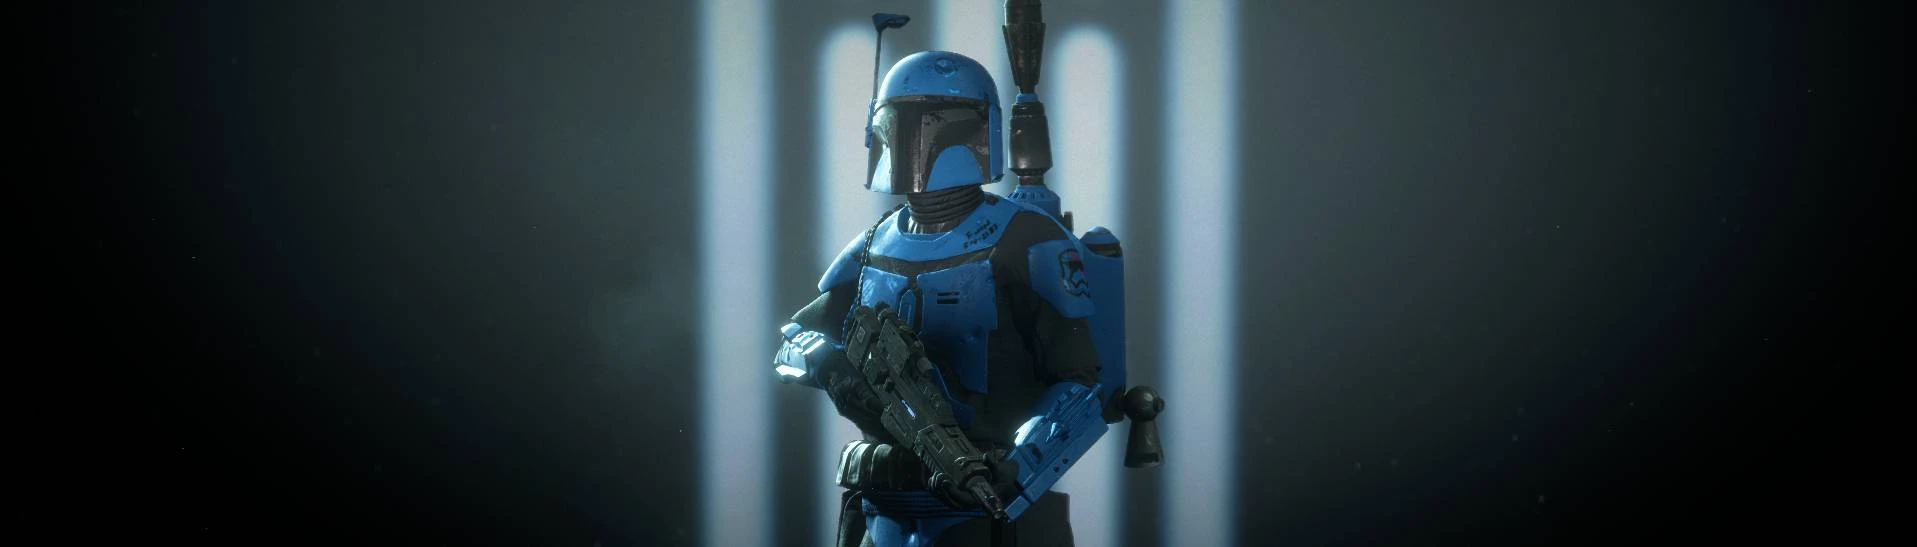 Star Wars Battlefront 2 Mods Add Characters from The Mandalorian Season 2  Finale